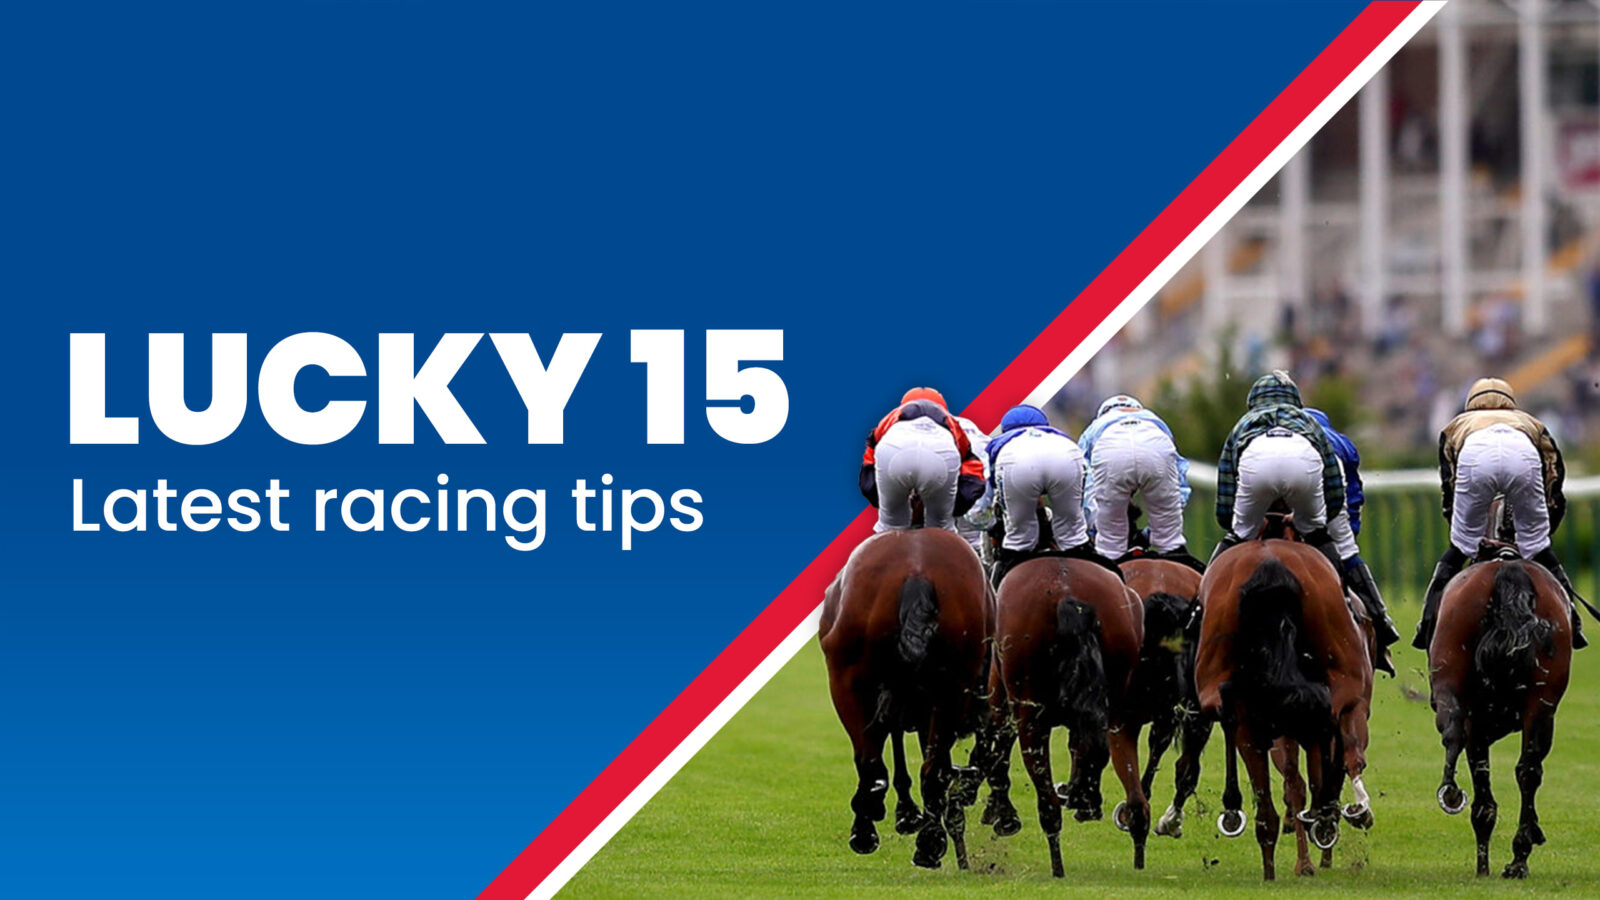 Tuesday Lucky 15 Tips: Racing club fans will be out in force